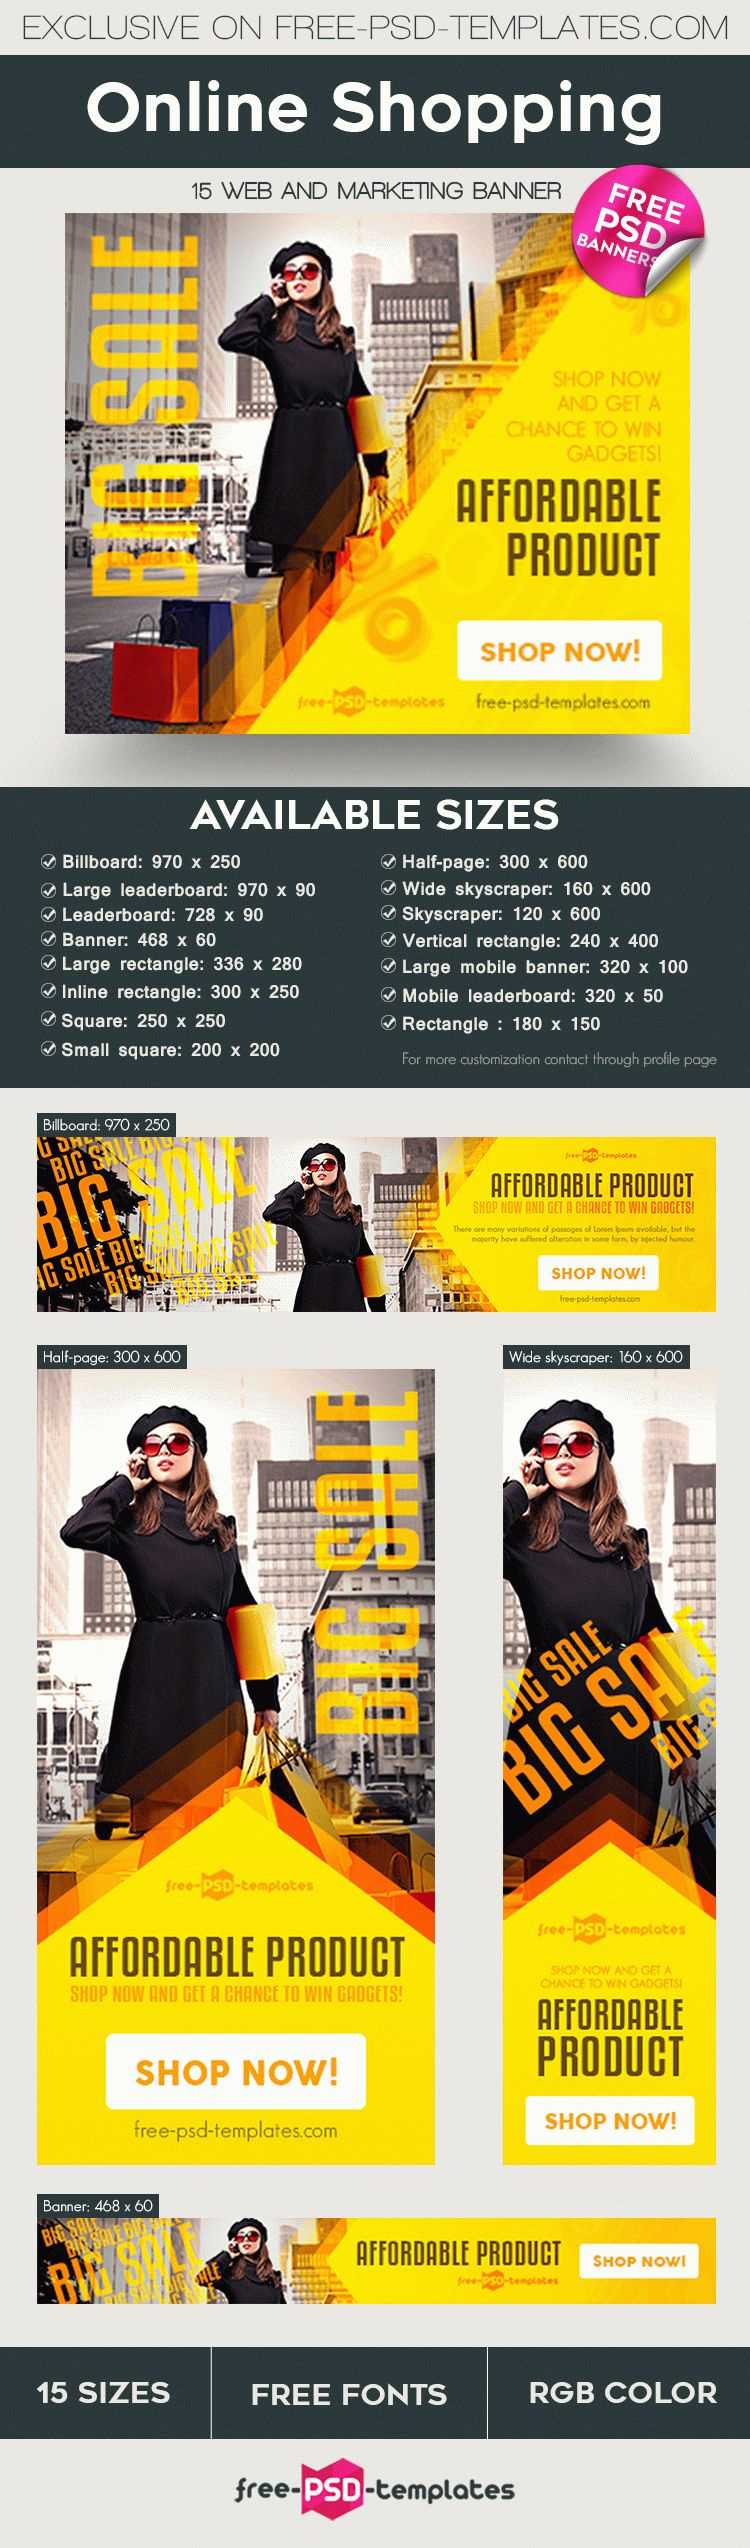 15 Free Online Shopping Banner In Psd | Free Psd Templates With Regard To Free Online Banner Templates